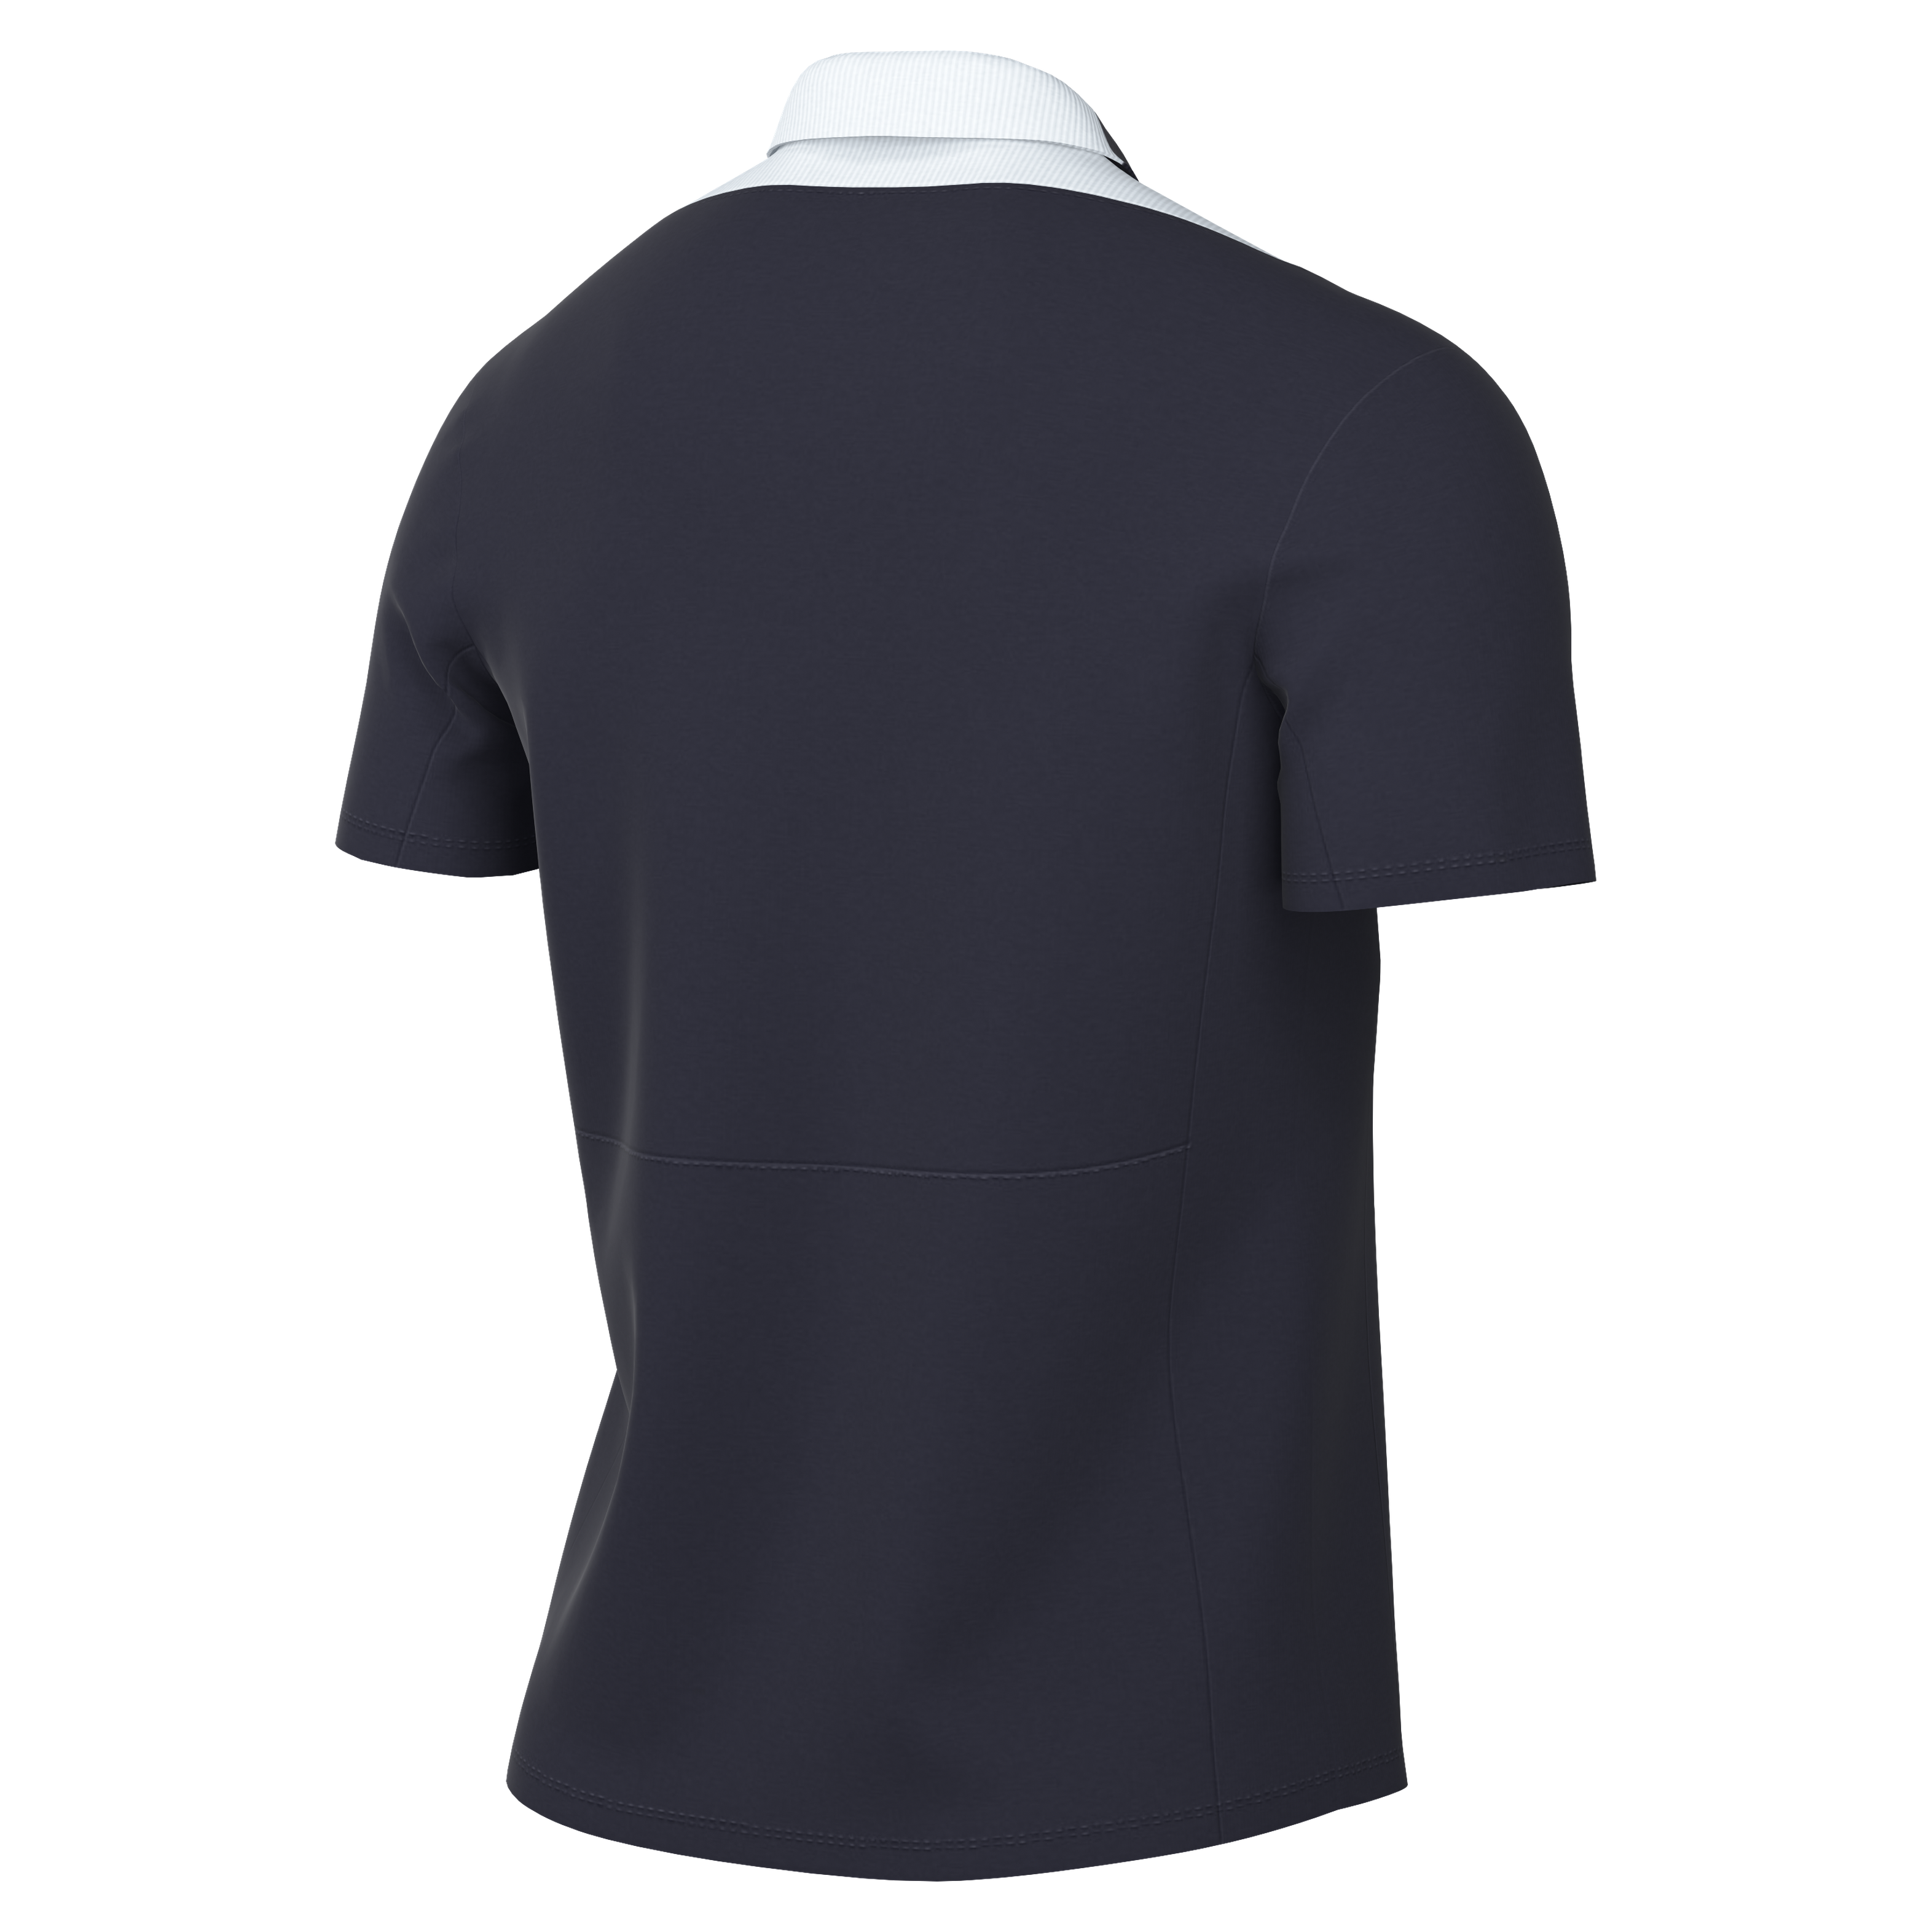 Nike Dri-FIT Academy Pro 24 Polo (Youth)